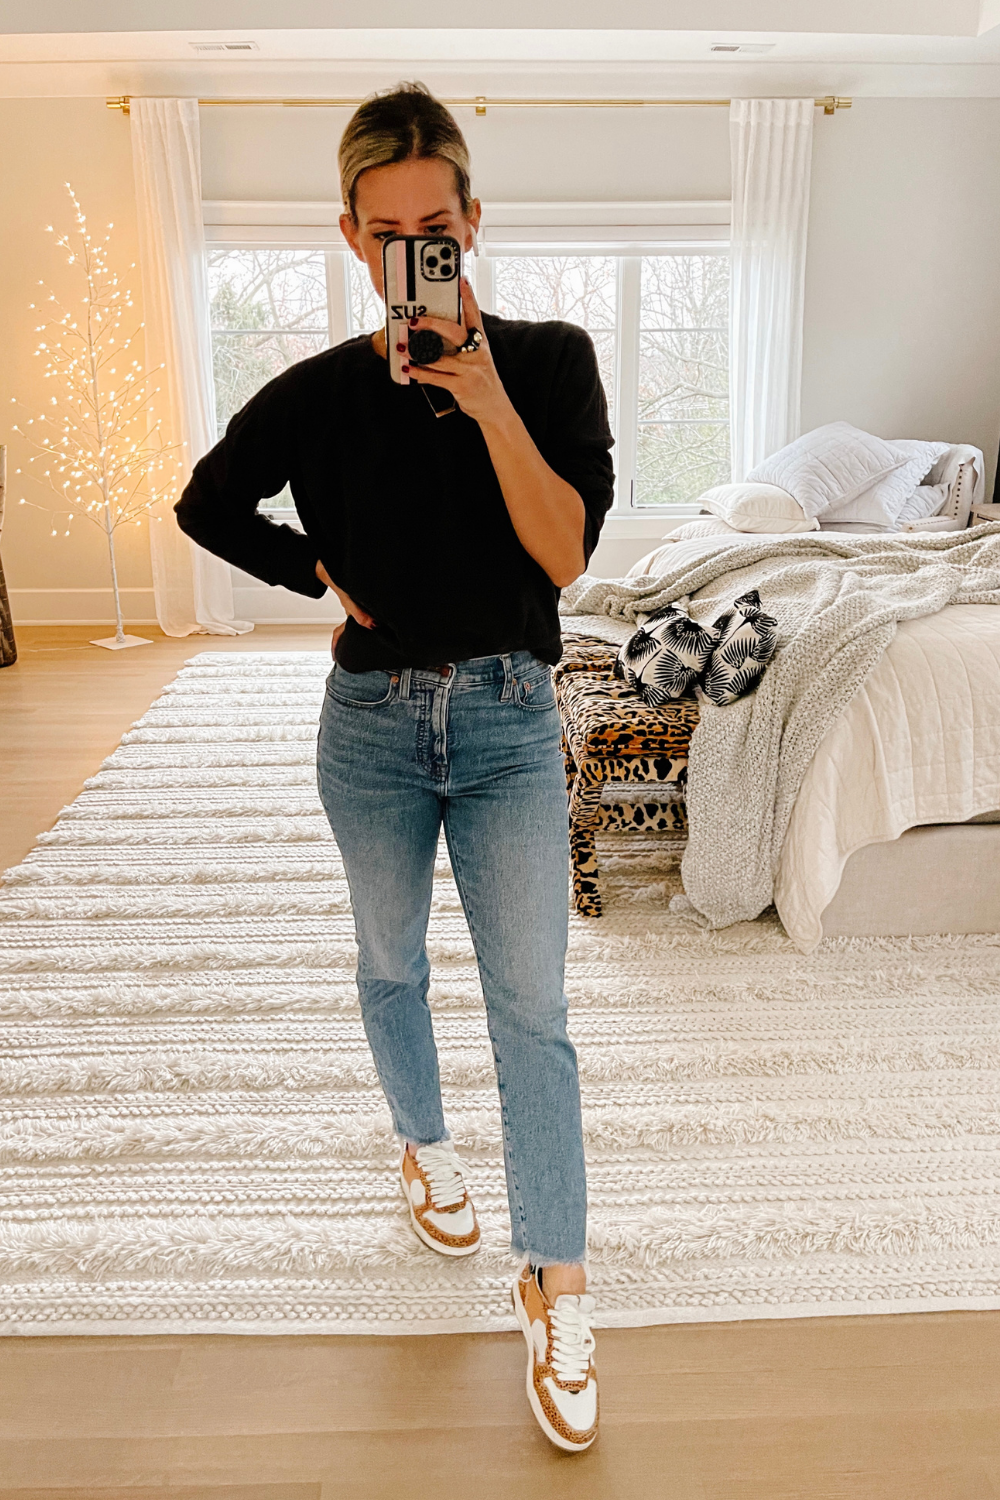 Suzanne wearing a black sweater, denim, and sneakers